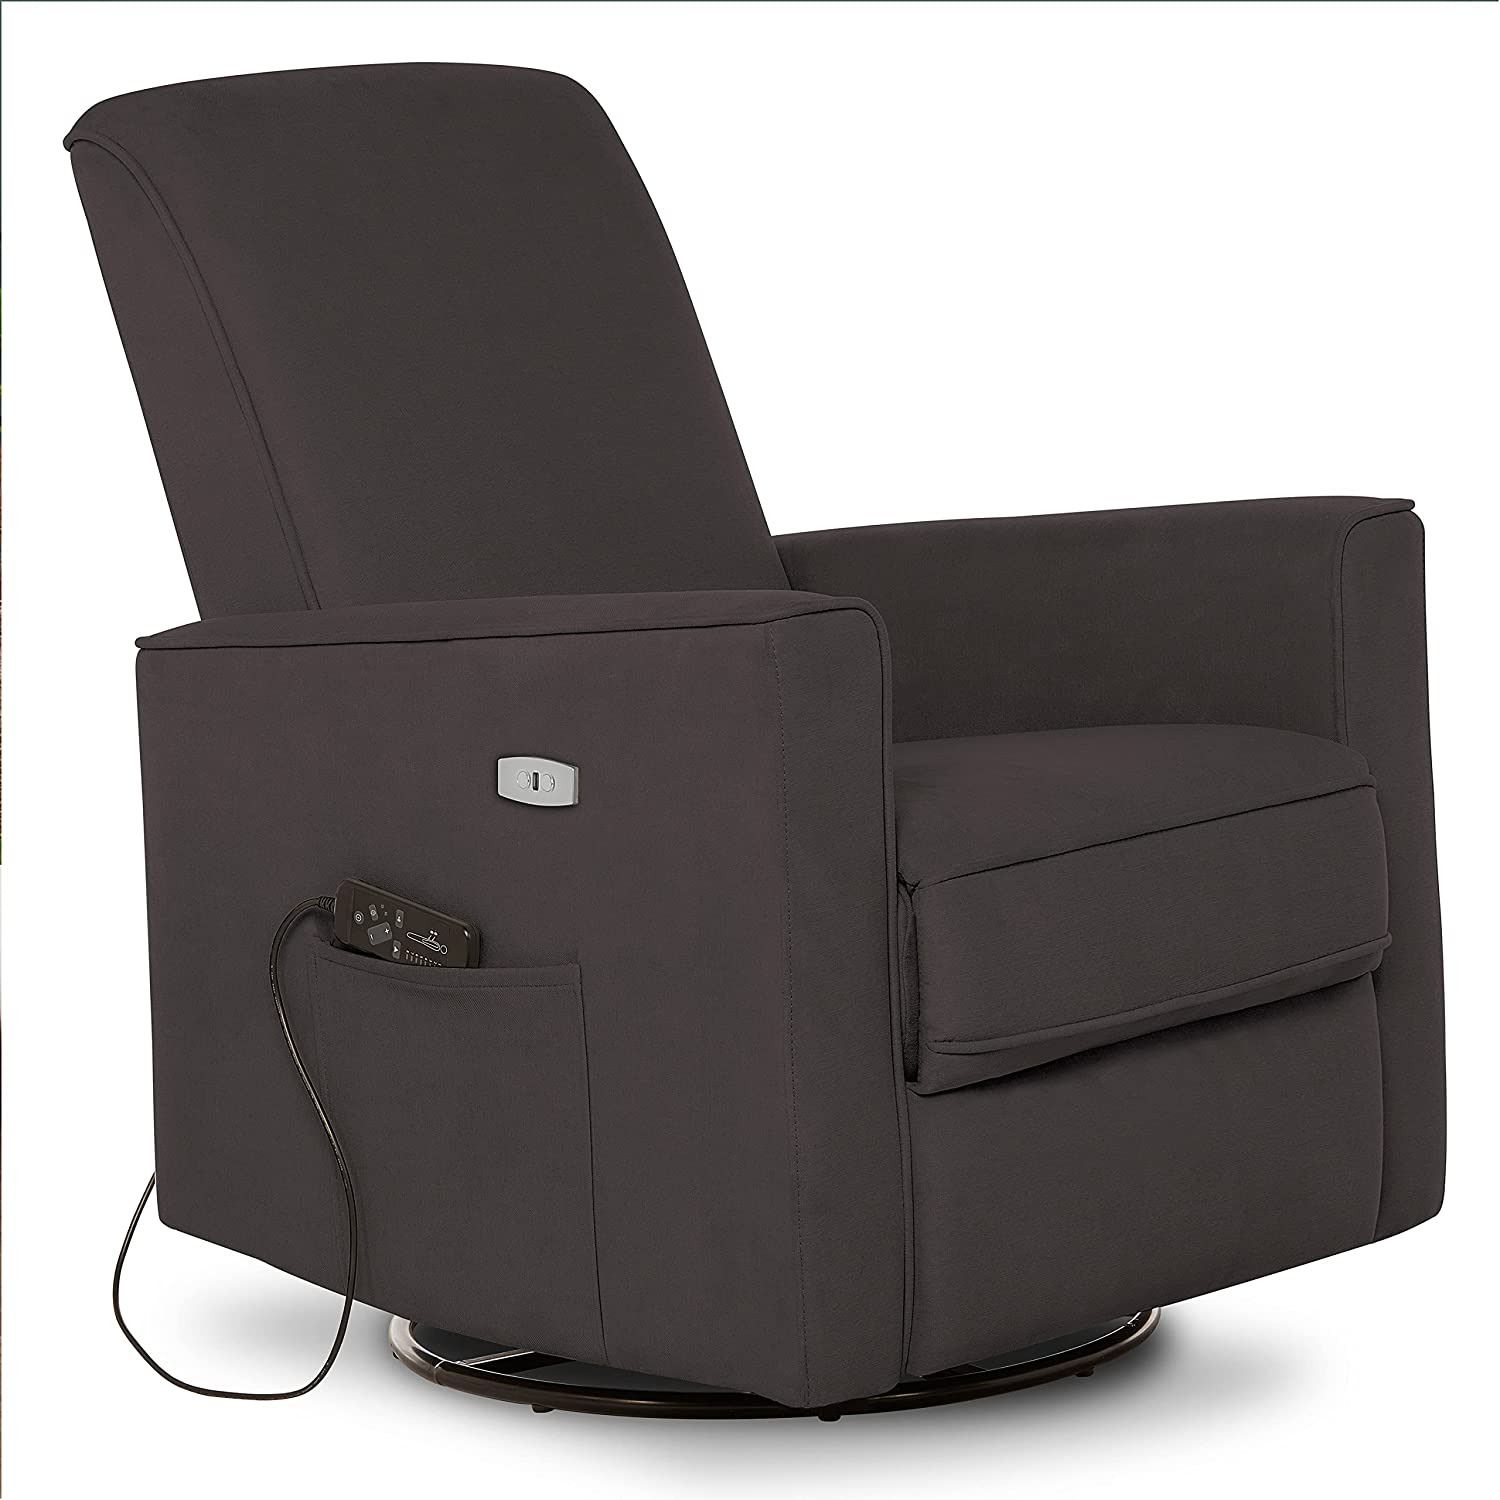 Evolur Harlow Deluxe Glider With Massager |recliner| Rocker In Charcoal